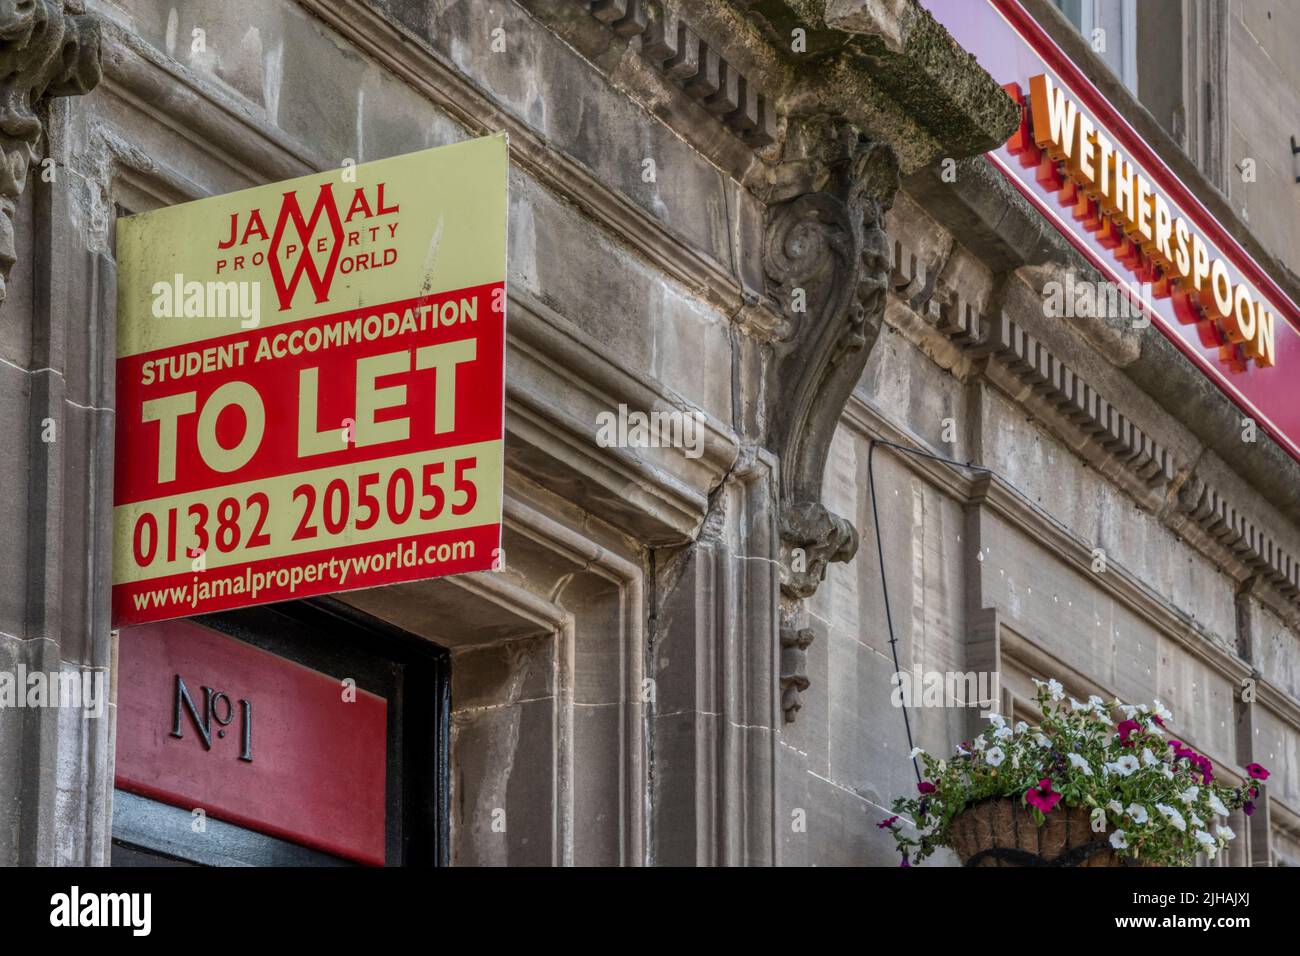 Student accommodation to let next to a Wetherspoon's pub in central Dundee. Stock Photo